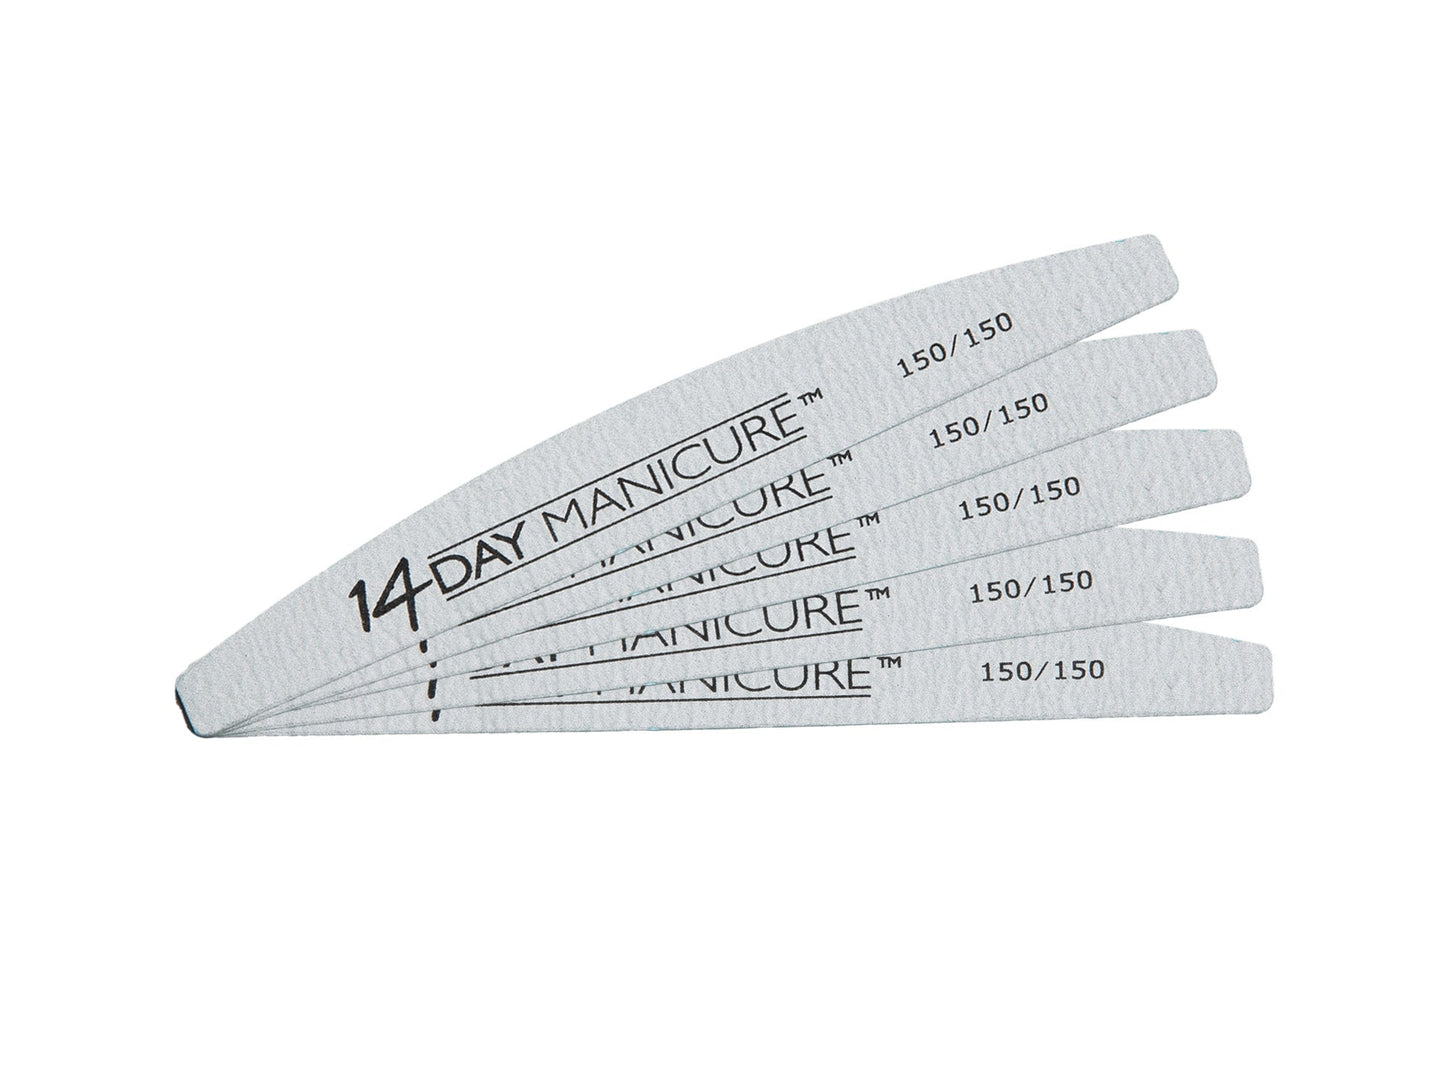 150/150 Grit Nail File - 14 Day Manicure - 3